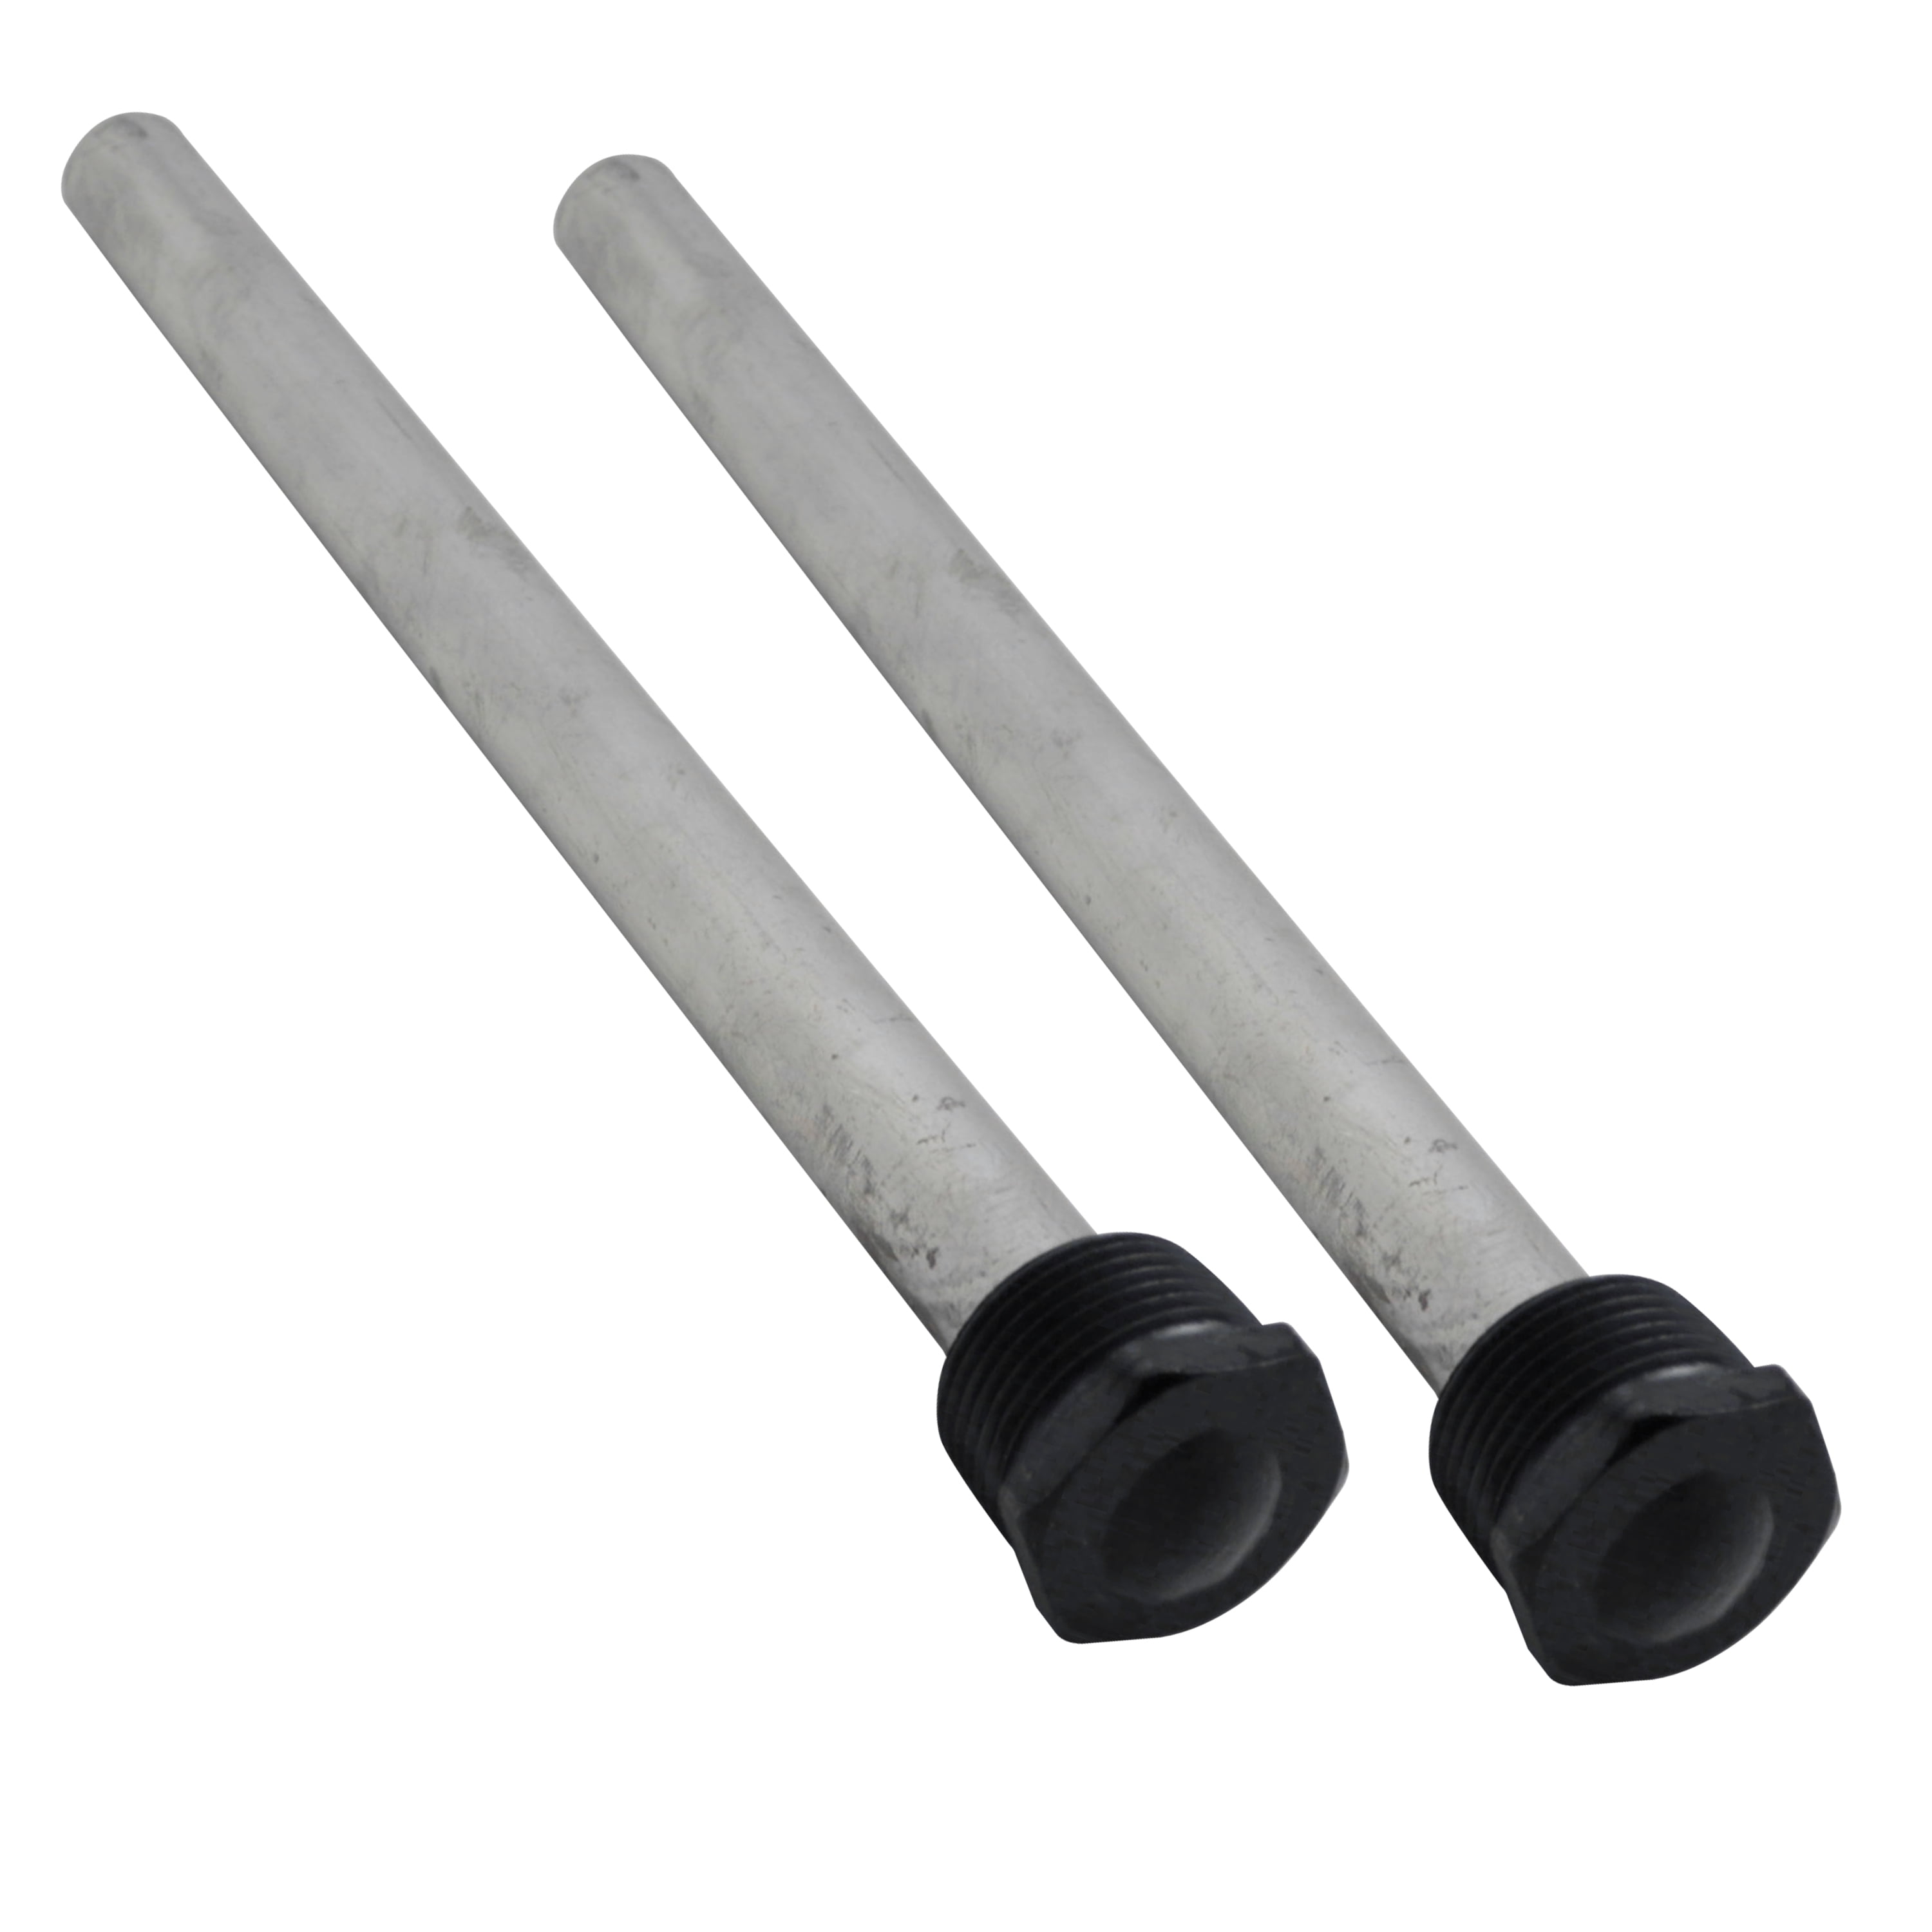 Leisure Coachworks RV Water Heater Magnesium Anode Rod 1-Pack 9.25 Length ¾ NPT Threads Compatible with Suburban and Mor-Flo Water Heater Tanks 